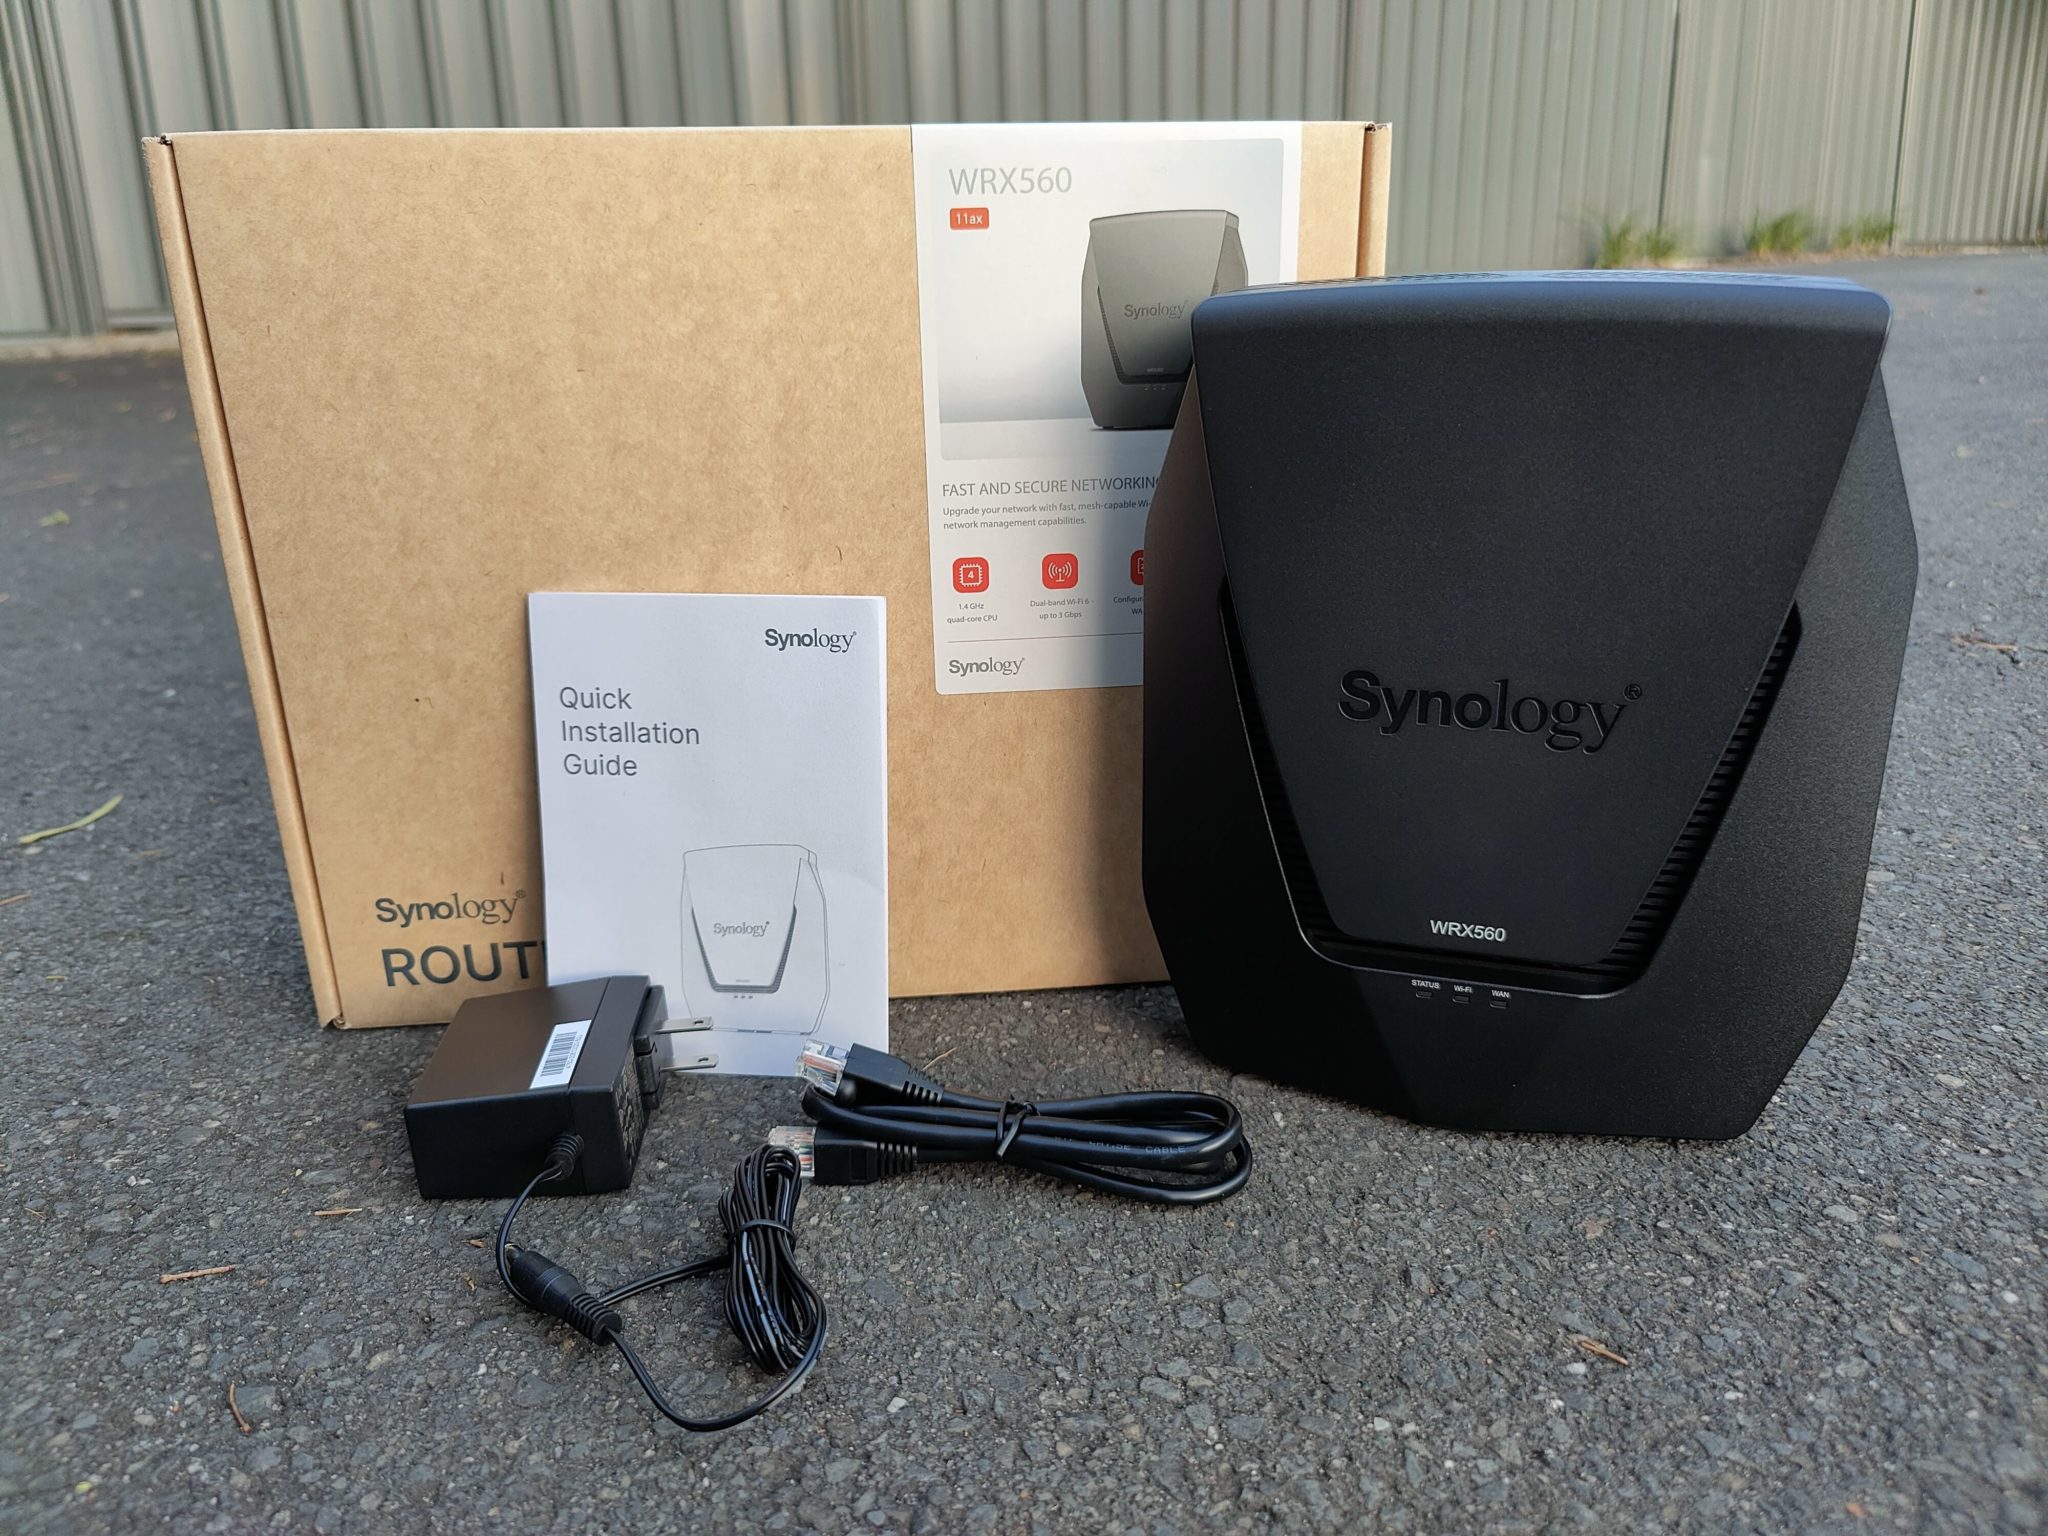 Synology WRX560 review – Ausdroid